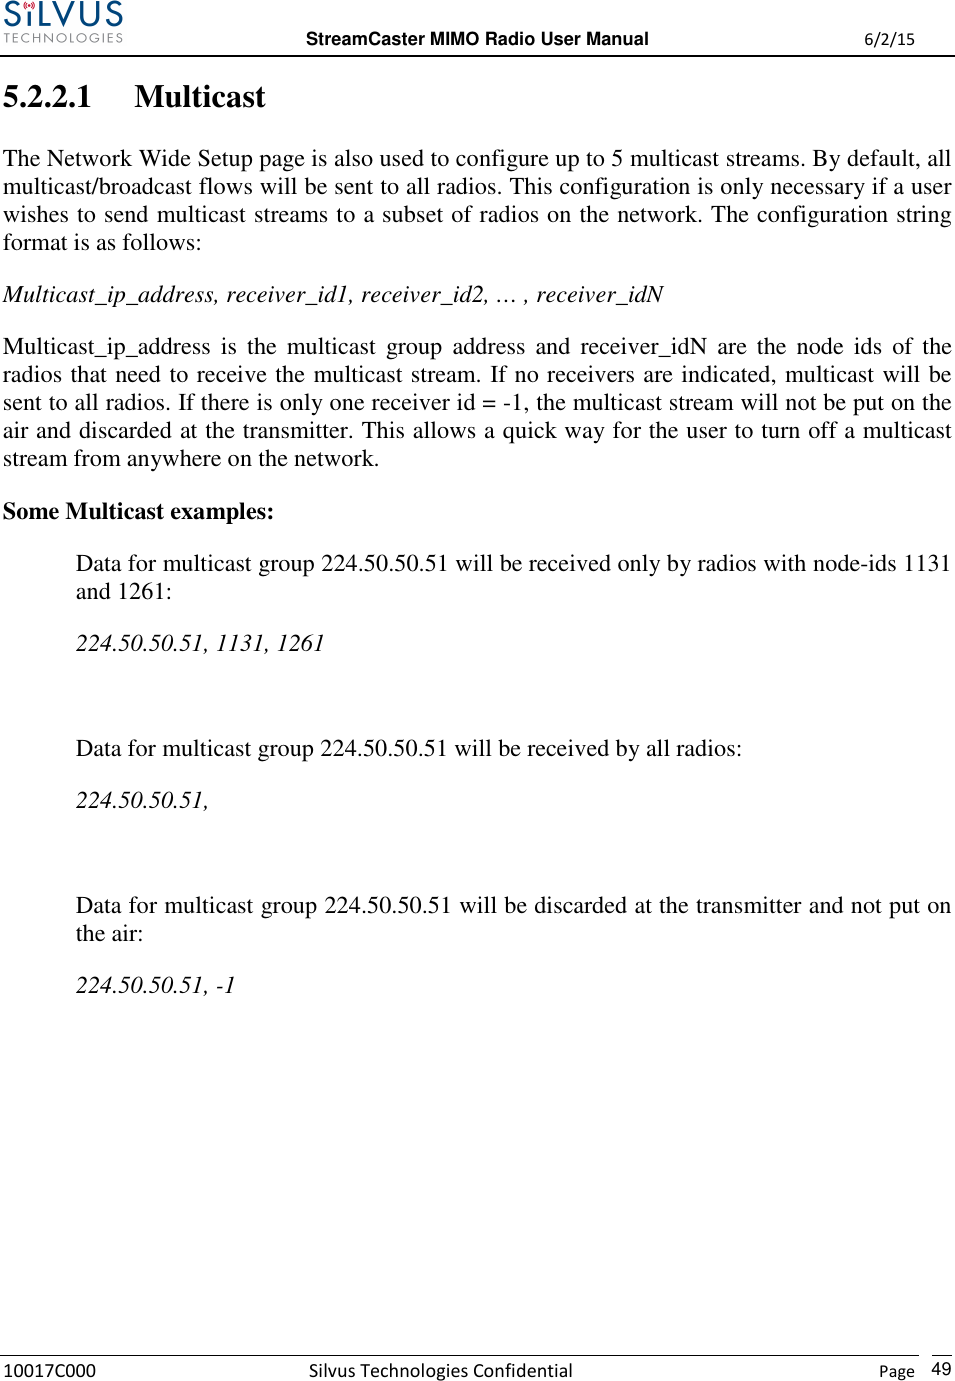  StreamCaster MIMO Radio User Manual  6/2/15 10017C000 Silvus Technologies Confidential    Page   49 5.2.2.1 Multicast The Network Wide Setup page is also used to configure up to 5 multicast streams. By default, all multicast/broadcast flows will be sent to all radios. This configuration is only necessary if a user wishes to send multicast streams to a subset of radios on the network. The configuration string format is as follows: Multicast_ip_address, receiver_id1, receiver_id2, … , receiver_idN Multicast_ip_address  is  the  multicast  group  address  and  receiver_idN  are  the  node  ids  of  the radios that need to receive the multicast stream. If no receivers are indicated, multicast will be sent to all radios. If there is only one receiver id = -1, the multicast stream will not be put on the air and discarded at the transmitter. This allows a quick way for the user to turn off a multicast stream from anywhere on the network. Some Multicast examples: Data for multicast group 224.50.50.51 will be received only by radios with node-ids 1131 and 1261: 224.50.50.51, 1131, 1261  Data for multicast group 224.50.50.51 will be received by all radios: 224.50.50.51,  Data for multicast group 224.50.50.51 will be discarded at the transmitter and not put on the air: 224.50.50.51, -1        